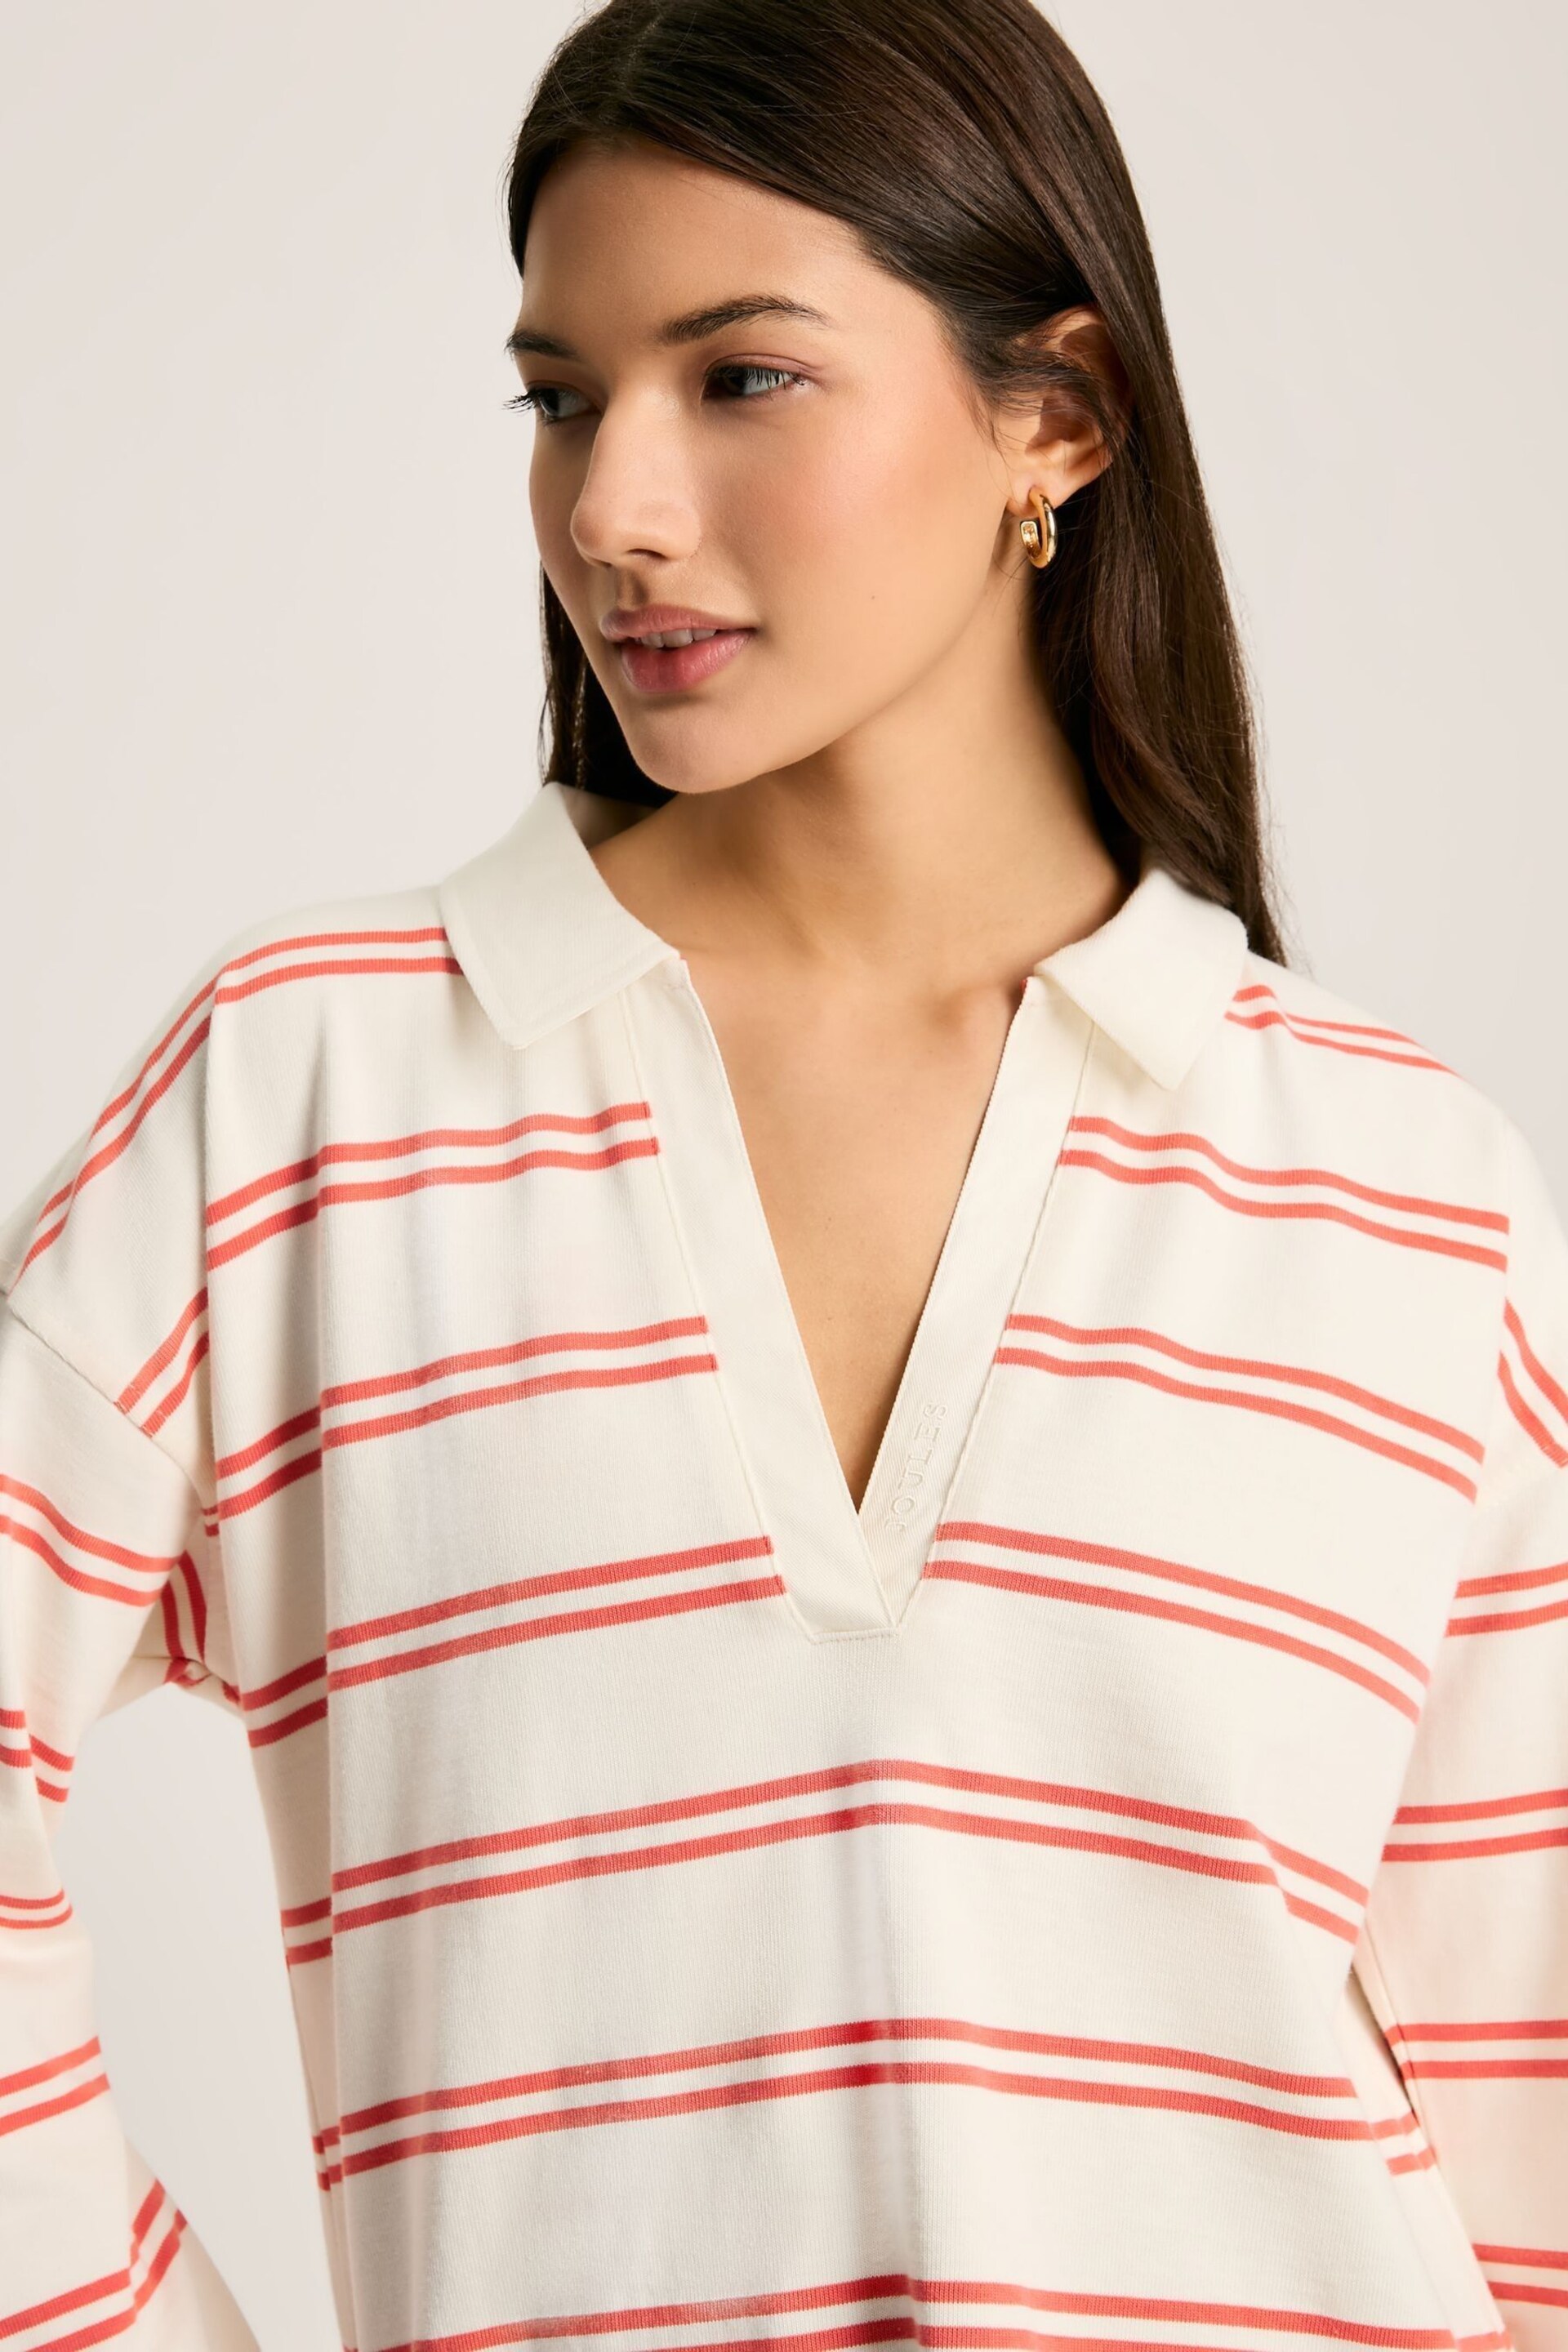 Joules Bayside Coral/White Cotton Deck Shirt - Image 5 of 8